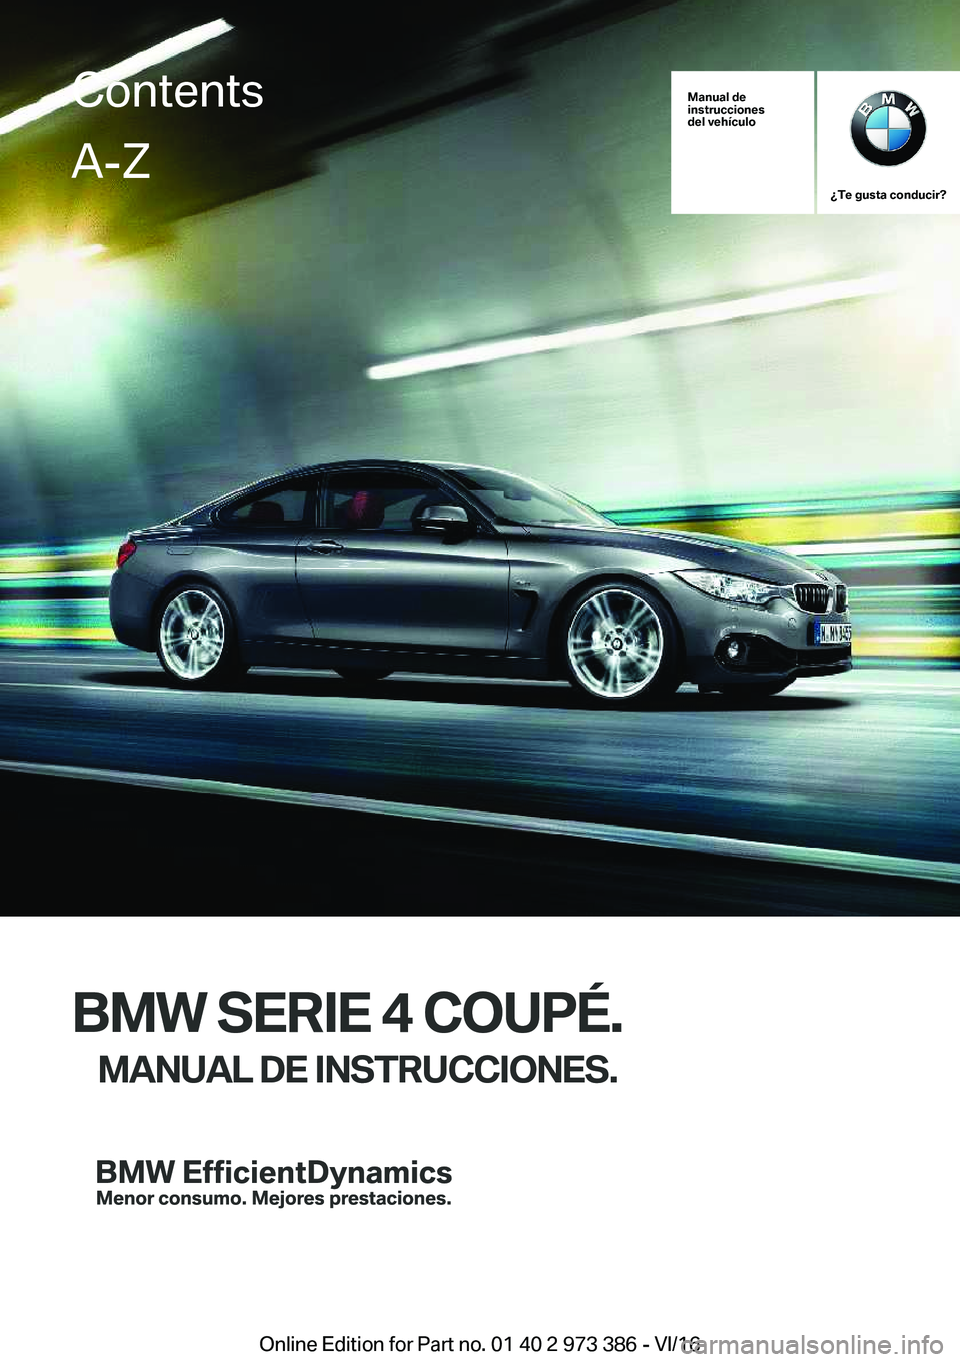 BMW 4 SERIES COUPE 2017  Manuales de Empleo (in Spanish) �M�a�n�u�a�l��d�e
�i�n�s�t�r�u�c�c�i�o�n�e�s
�d�e�l��v�e�h�